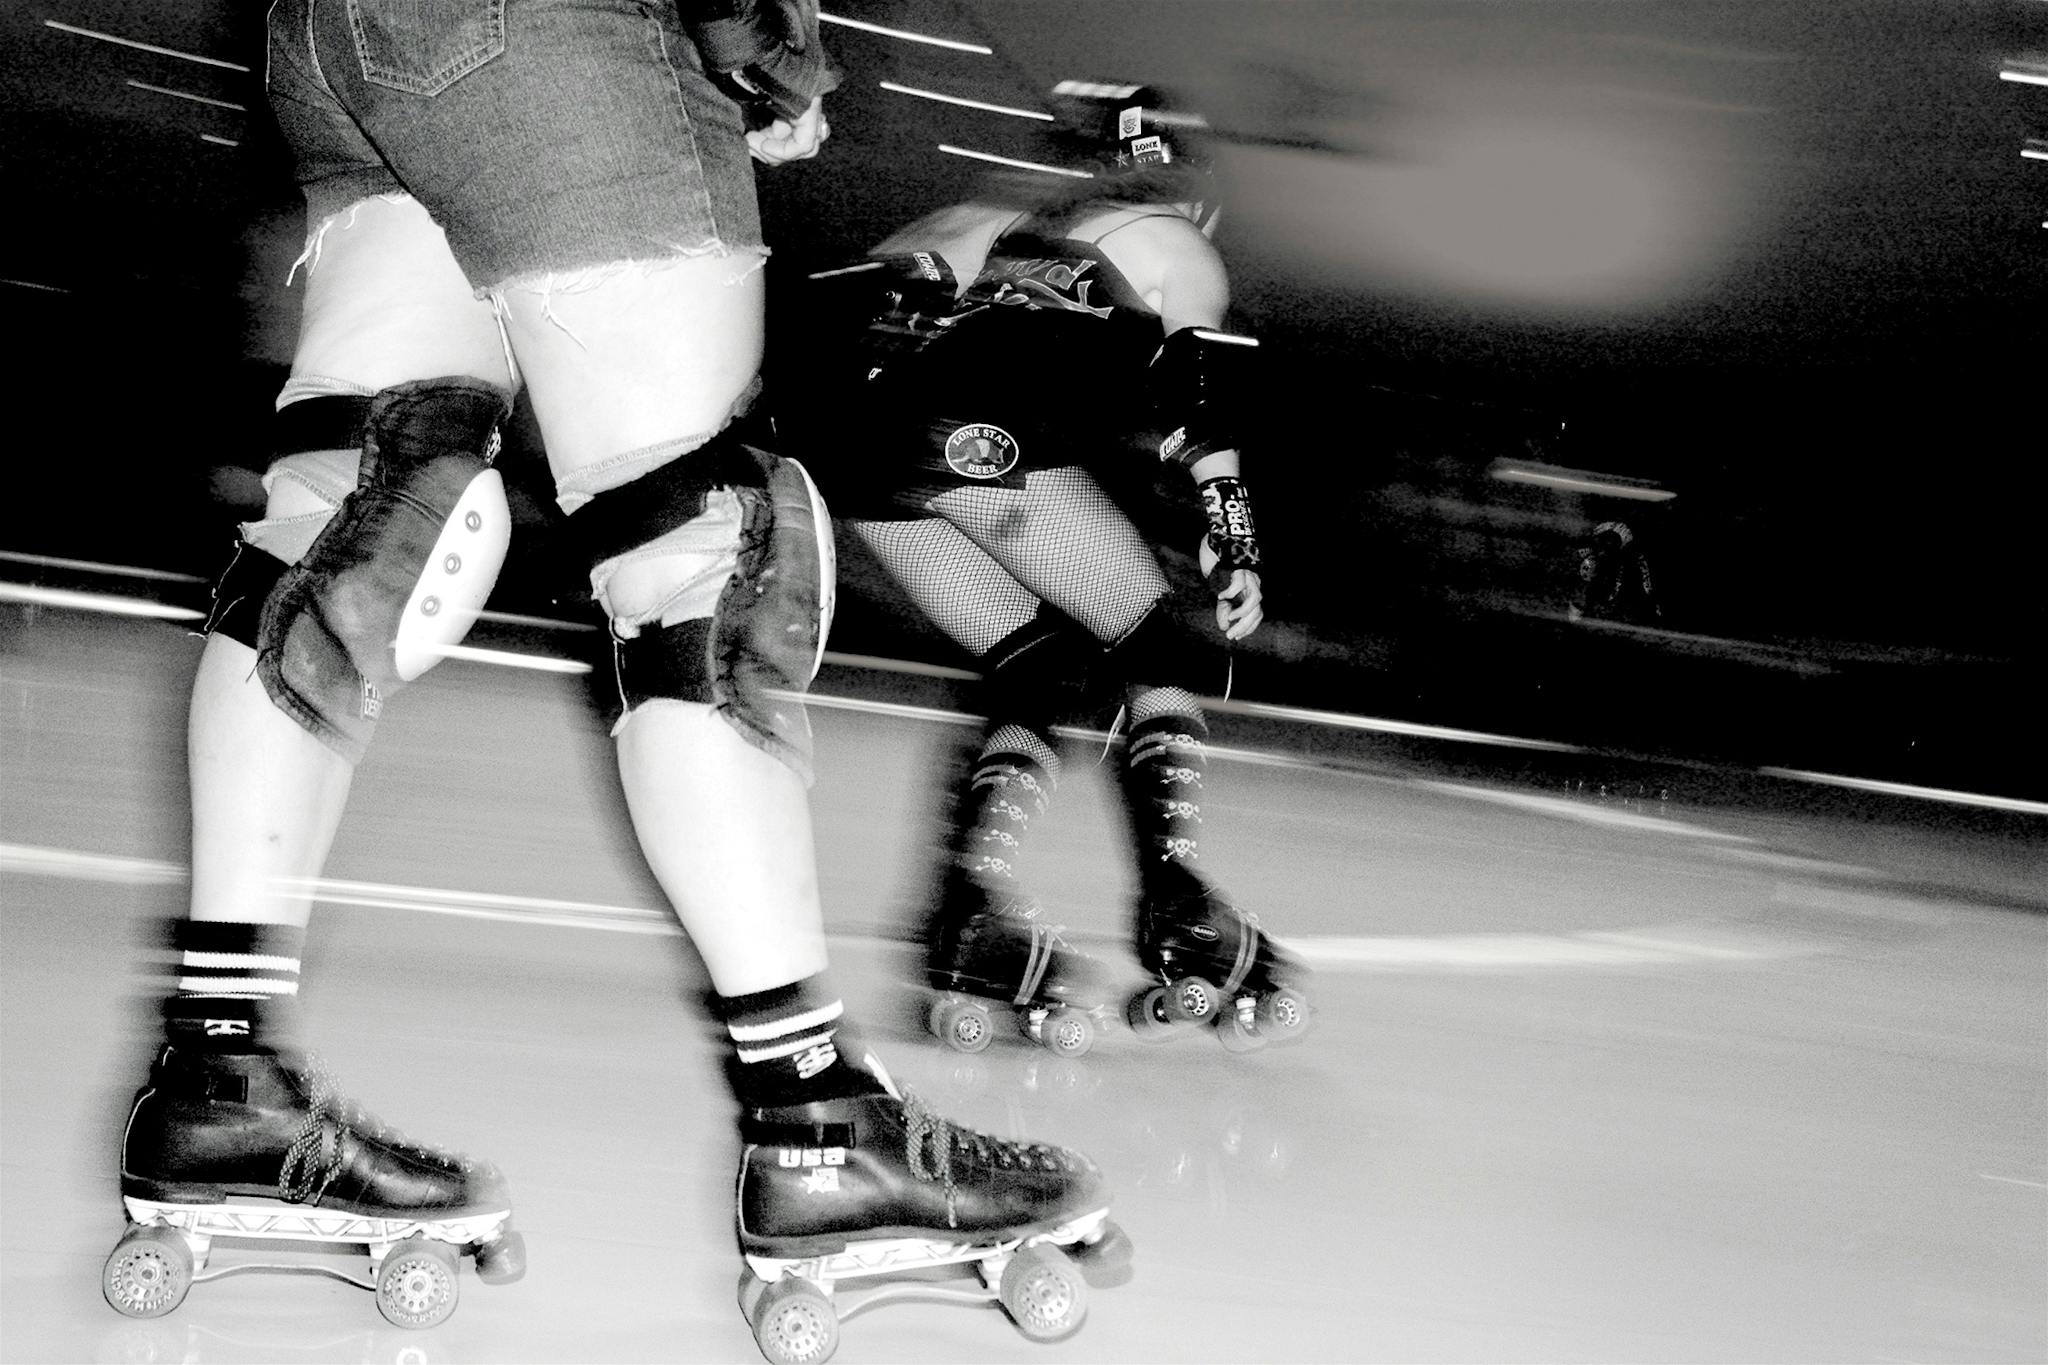 Skaters with Texas Rollergirls round the rink in a roller derby bout.